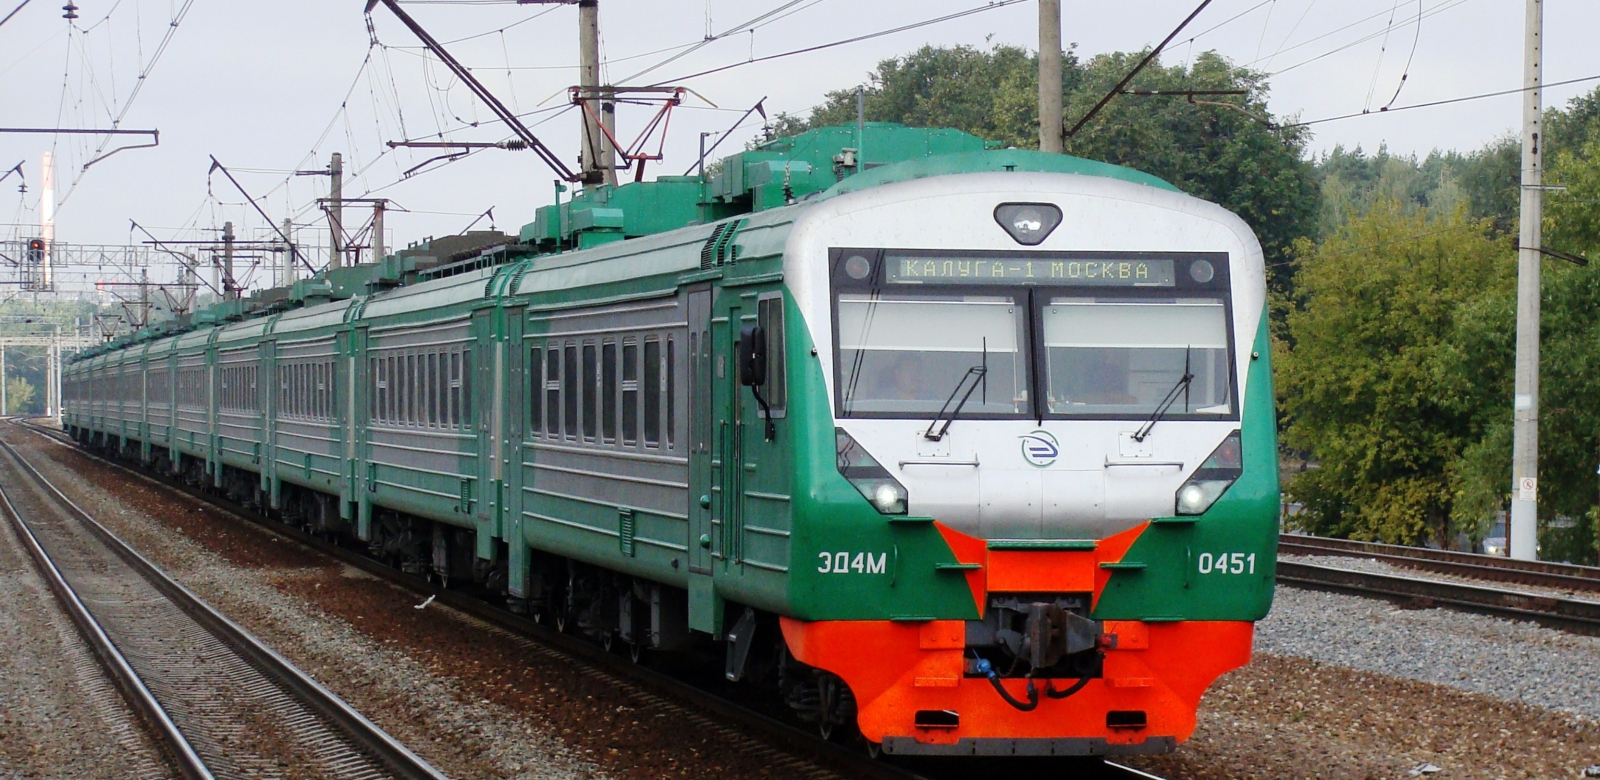 ЭД4-0451 with a modern front design in August 2014 on the Kaluga-Moscow line